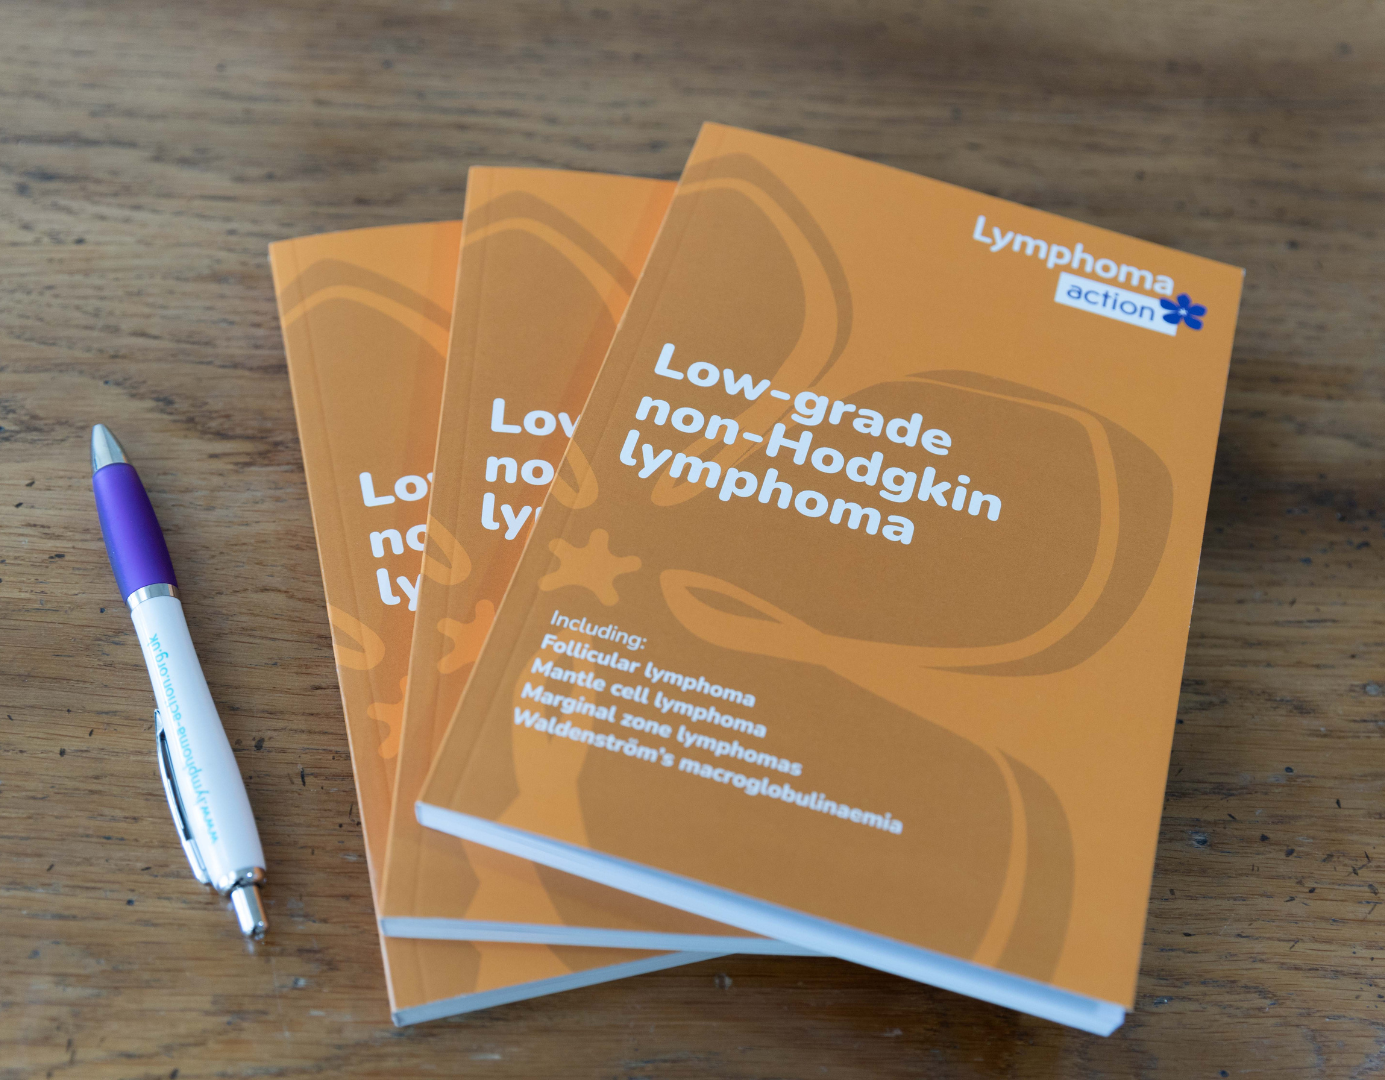 Image 3 copies of the book and a lymphoma action pen. Book has an orange cover with white writing. Title is Low-grade non-Hodgkin lymphoma. Lymphoma Action logo in top right-hand corner